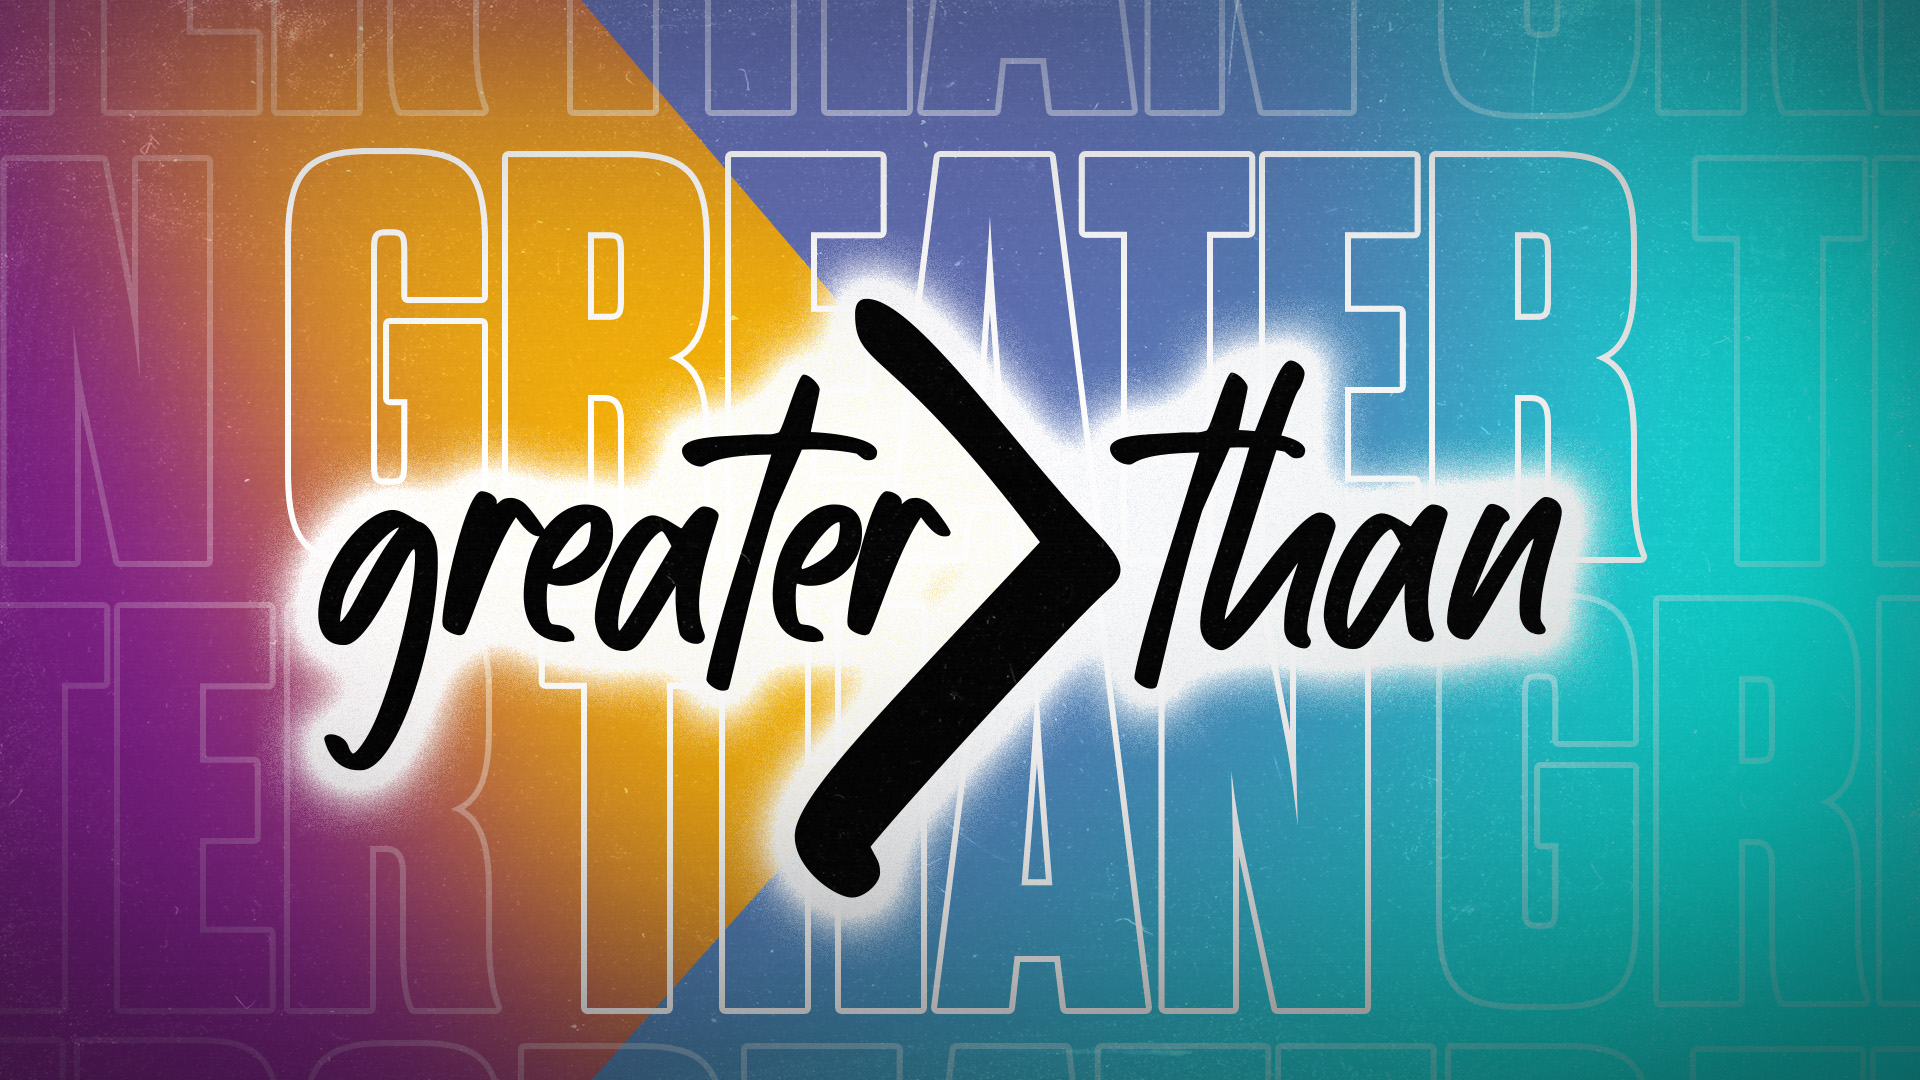 GREATER THAN